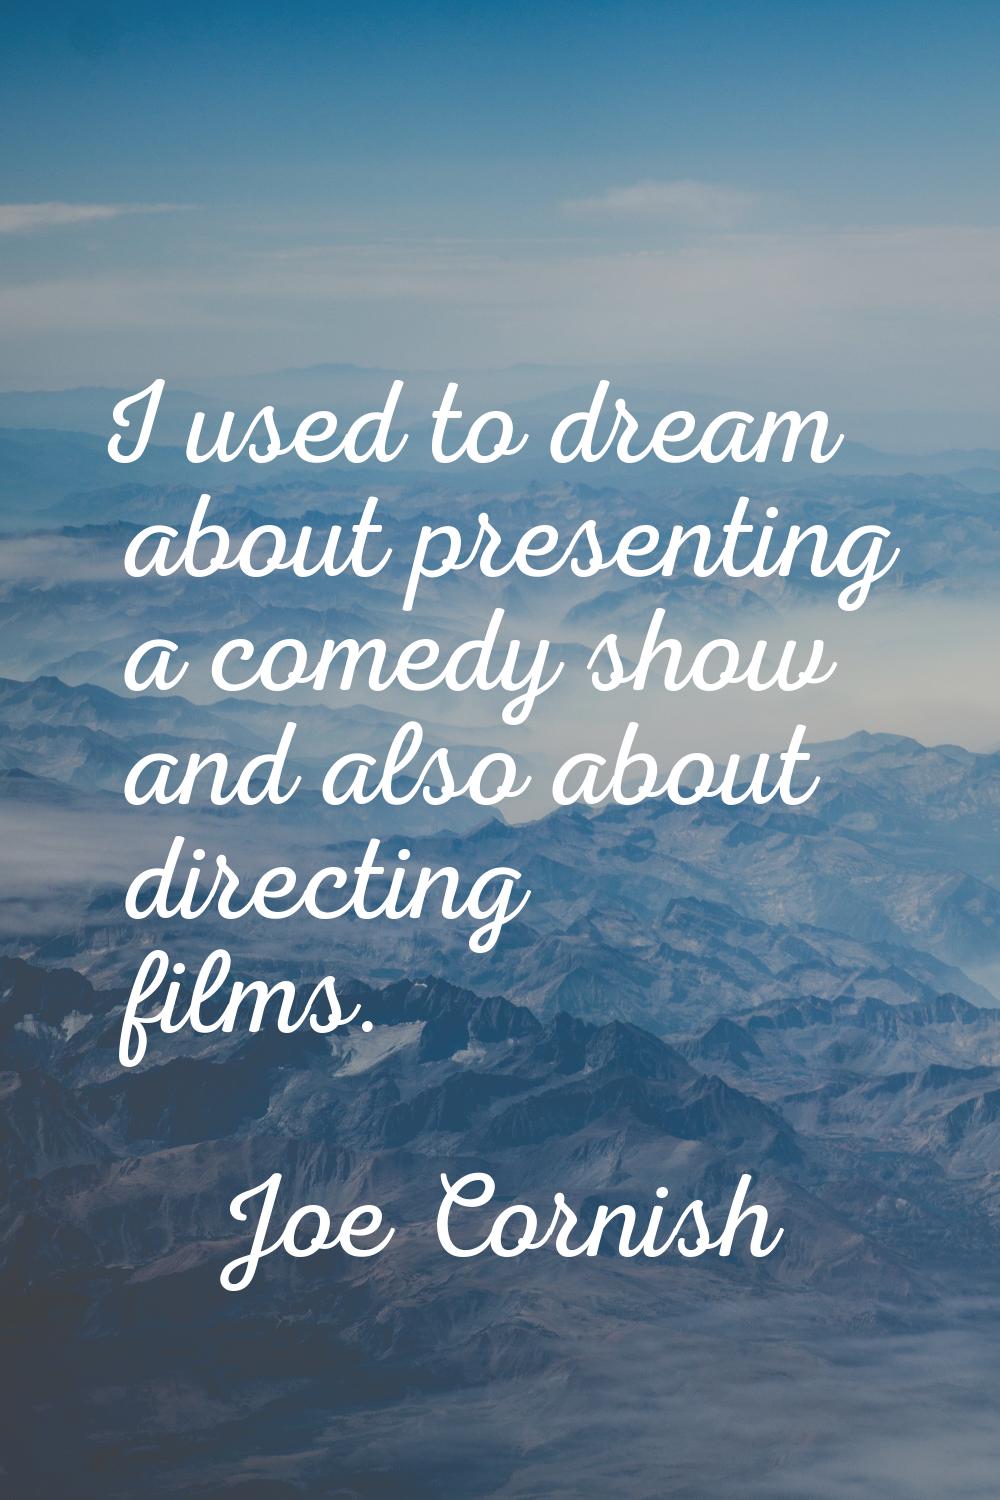 I used to dream about presenting a comedy show and also about directing films.